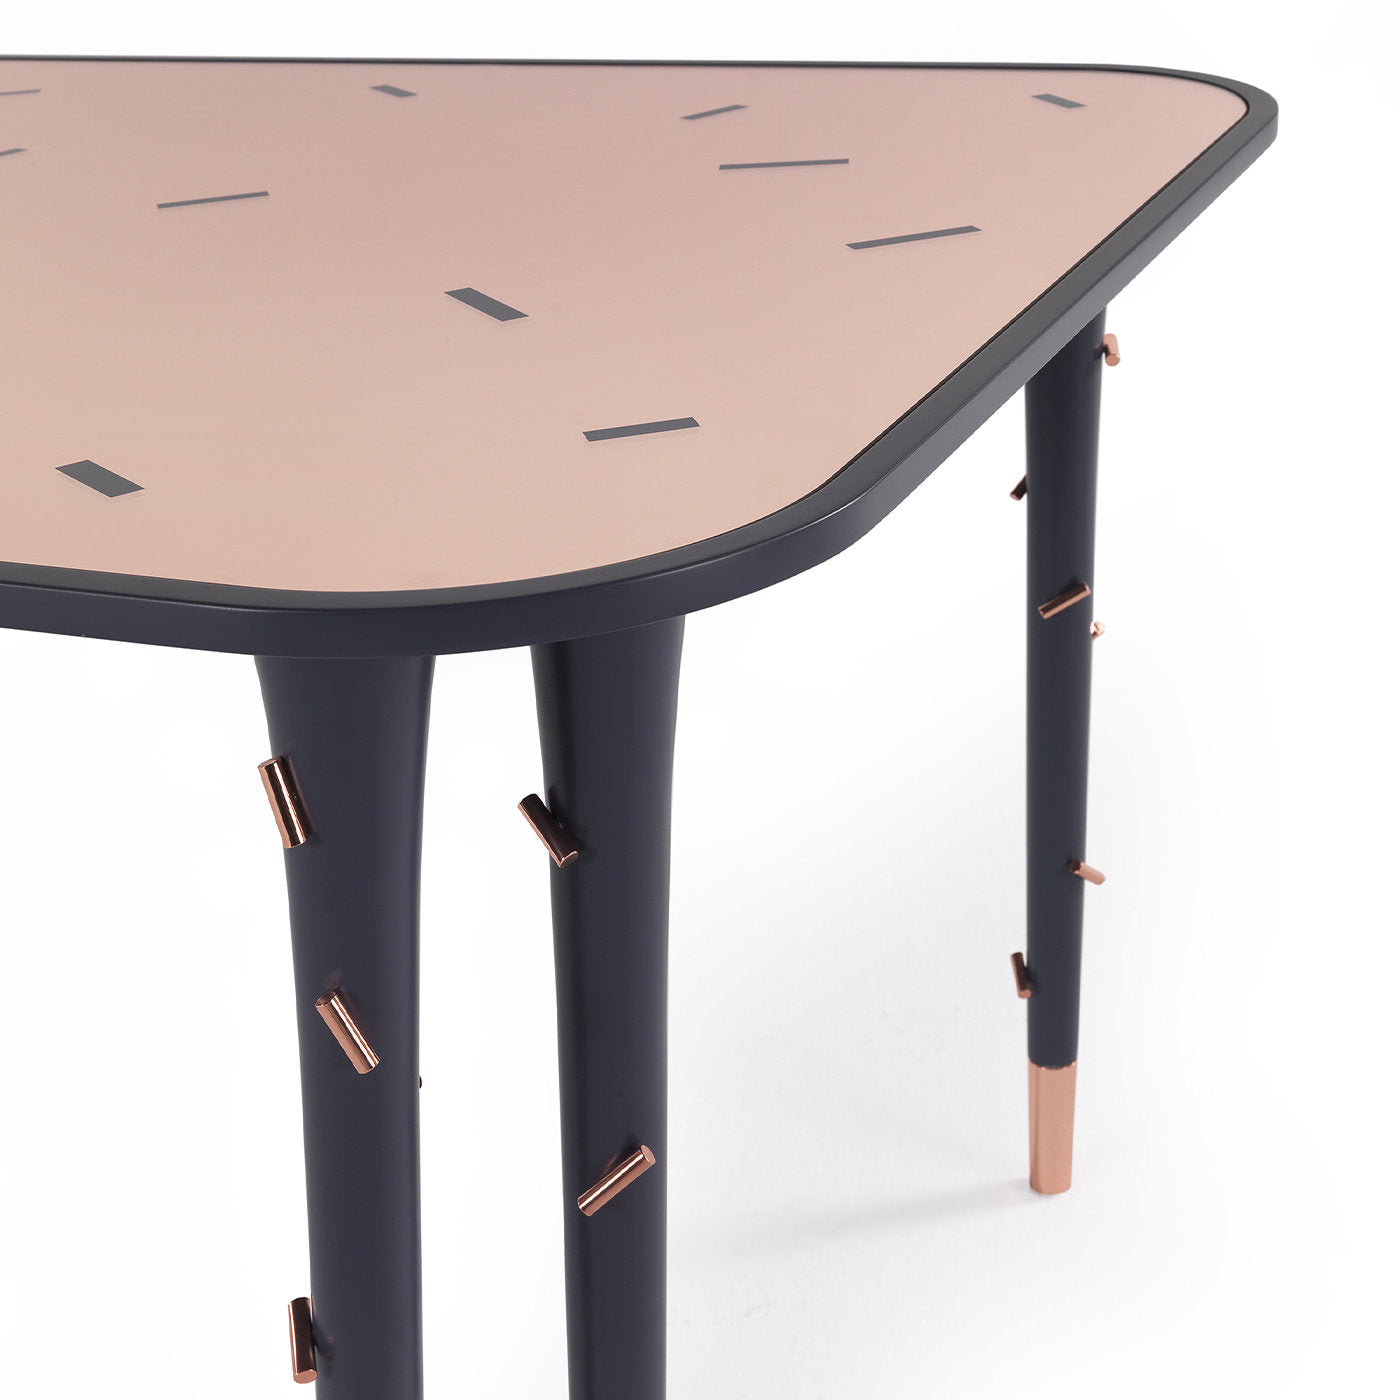 Mettic Dining Table by Matteo Cibic - Alternative view 2